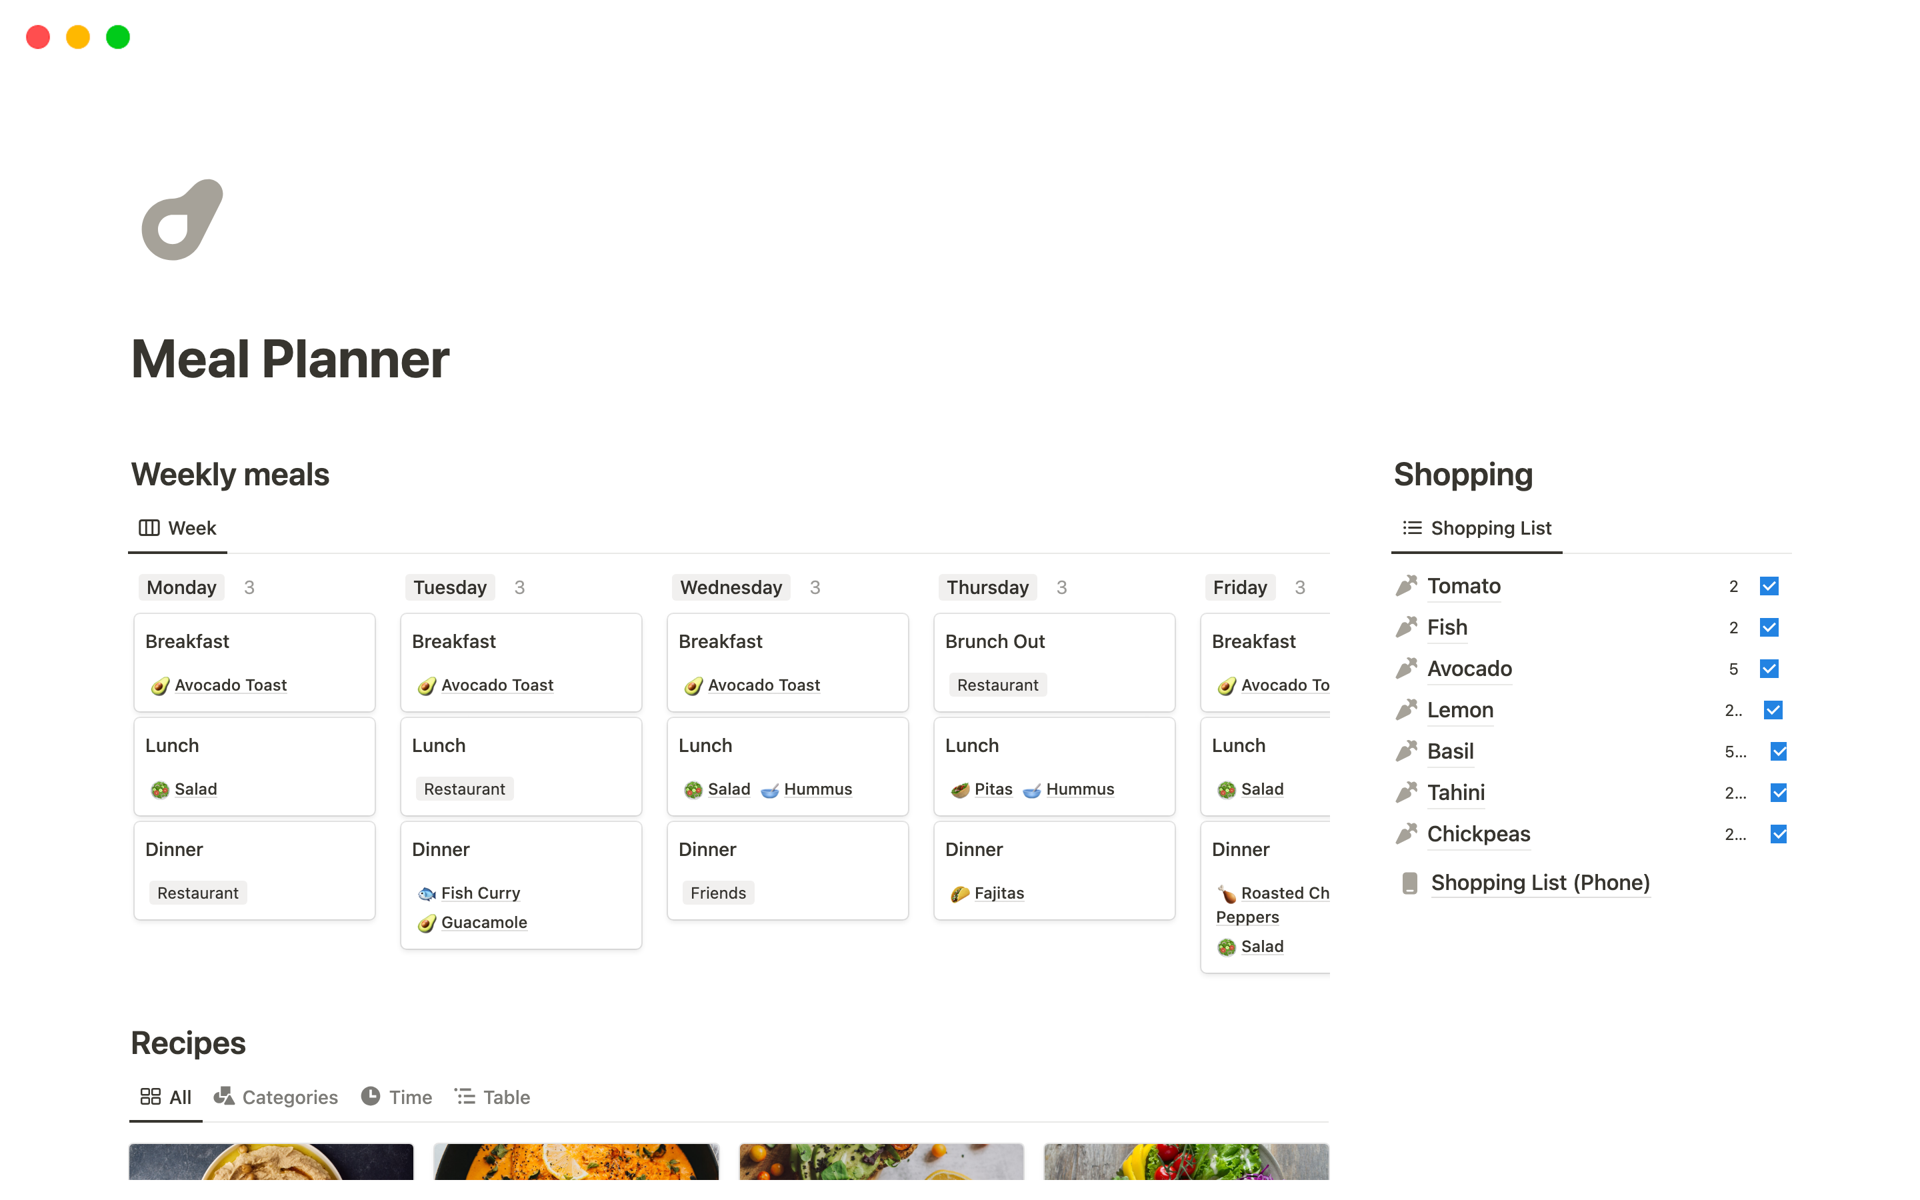 Plan your weekly meals and get your groceries list auto-generated